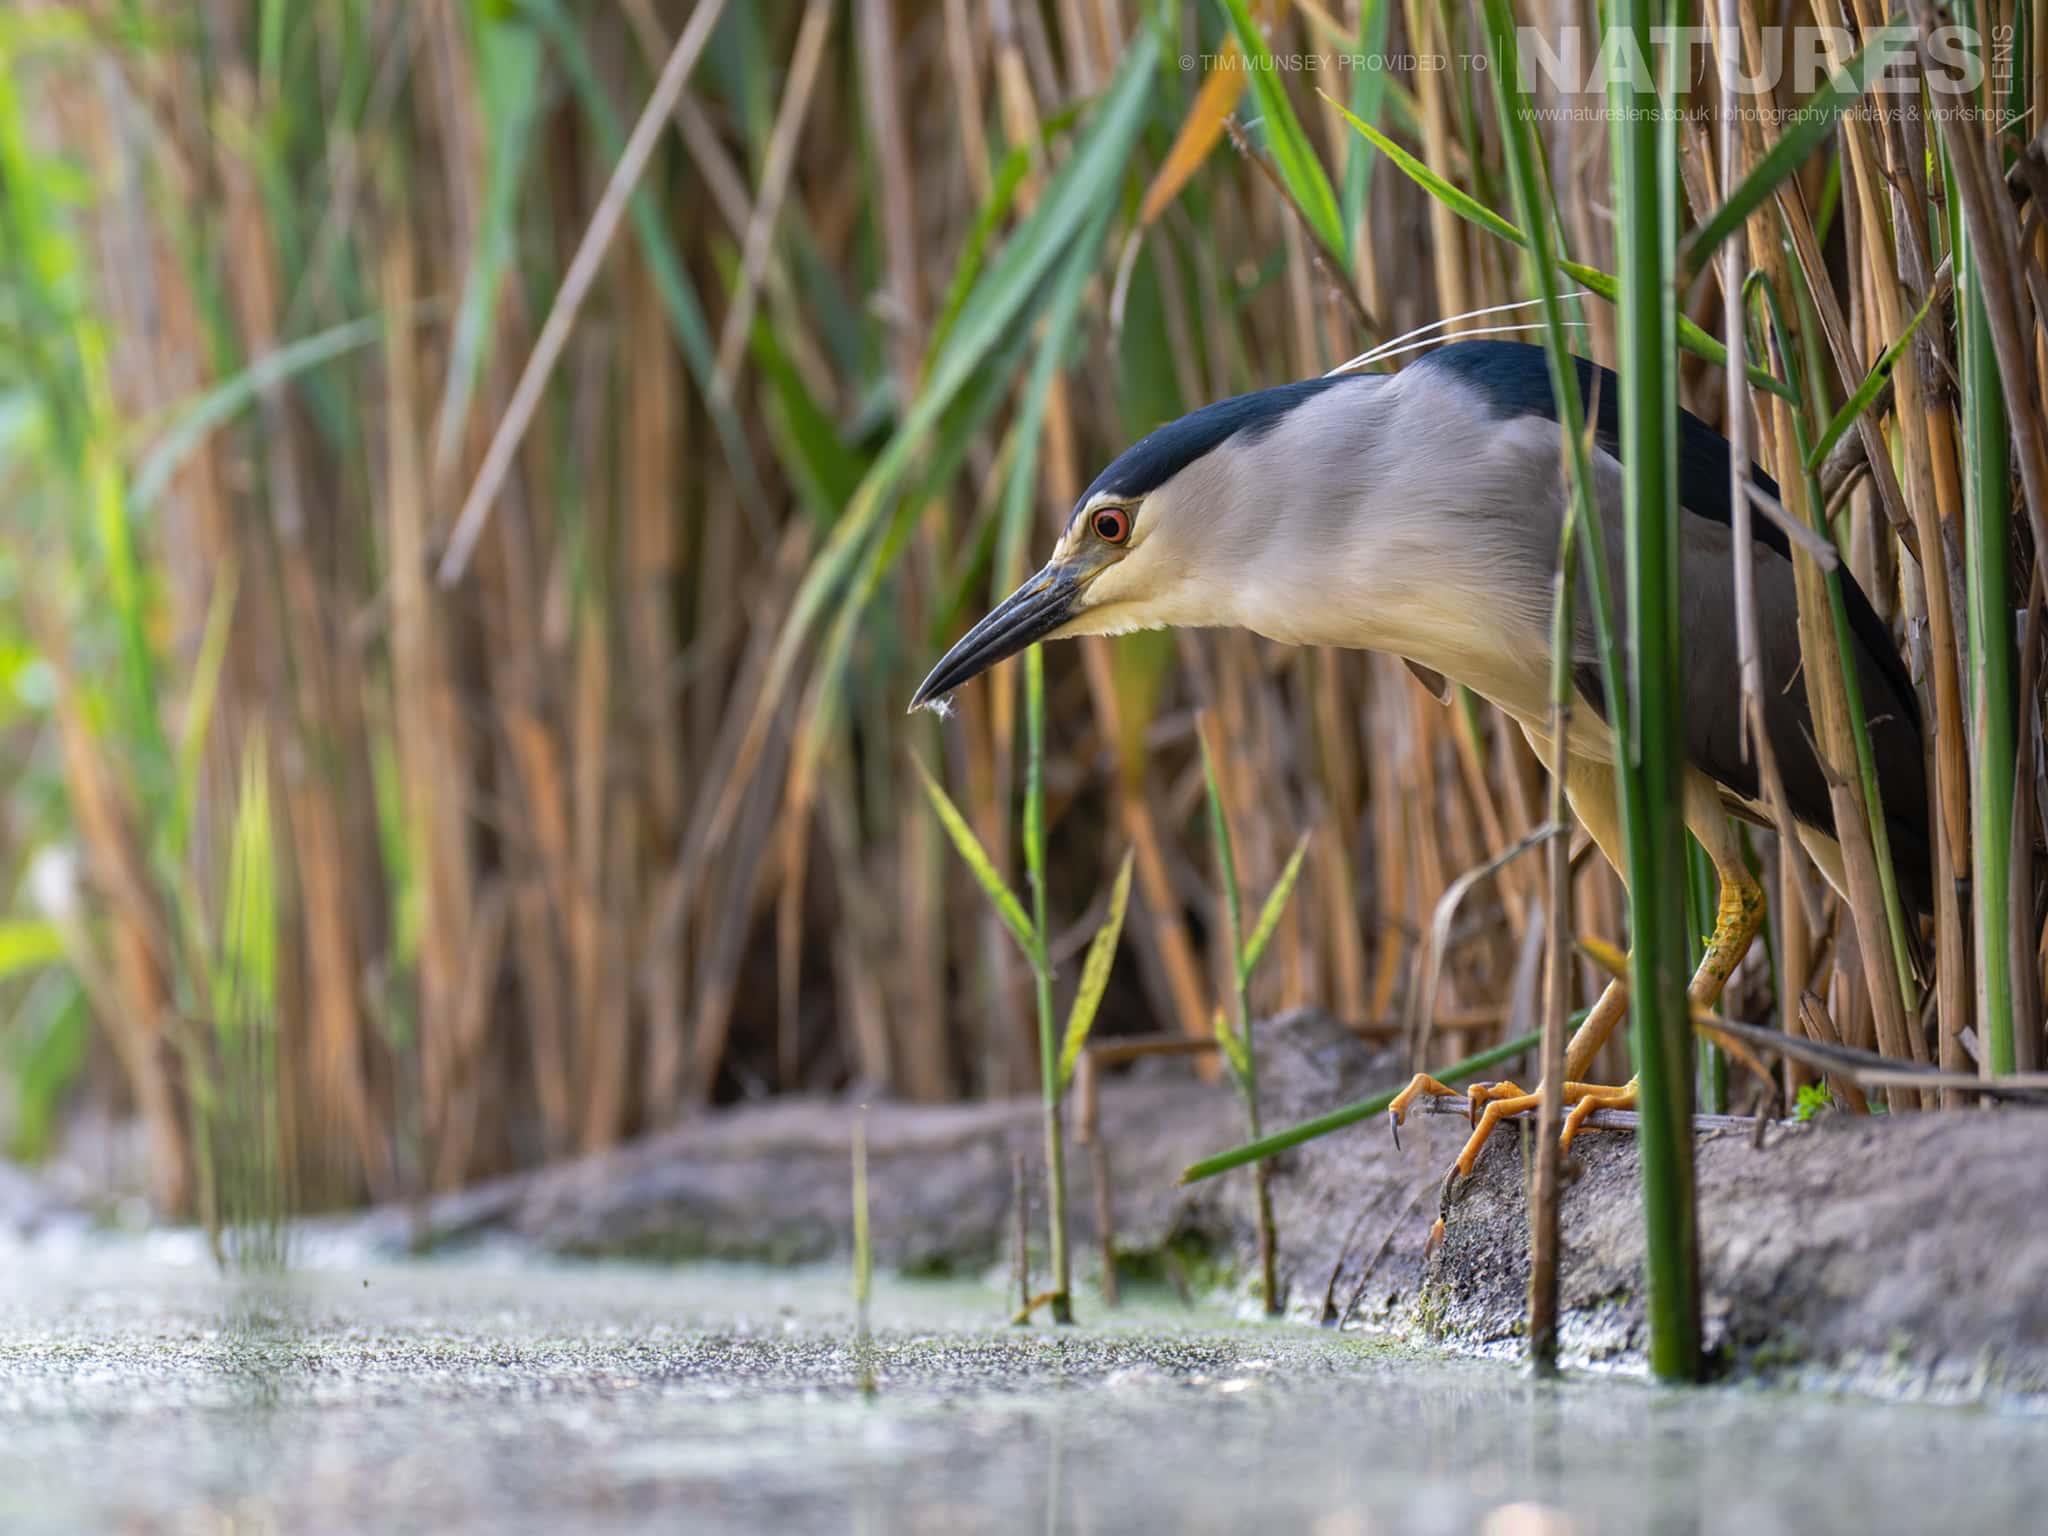 A Black Crowned Night Heron At One Of The Ponds Photographed At Bence Máté's Hides In Hungary During the Natureslens Wildlife Photography Hides of Hungary Holiday